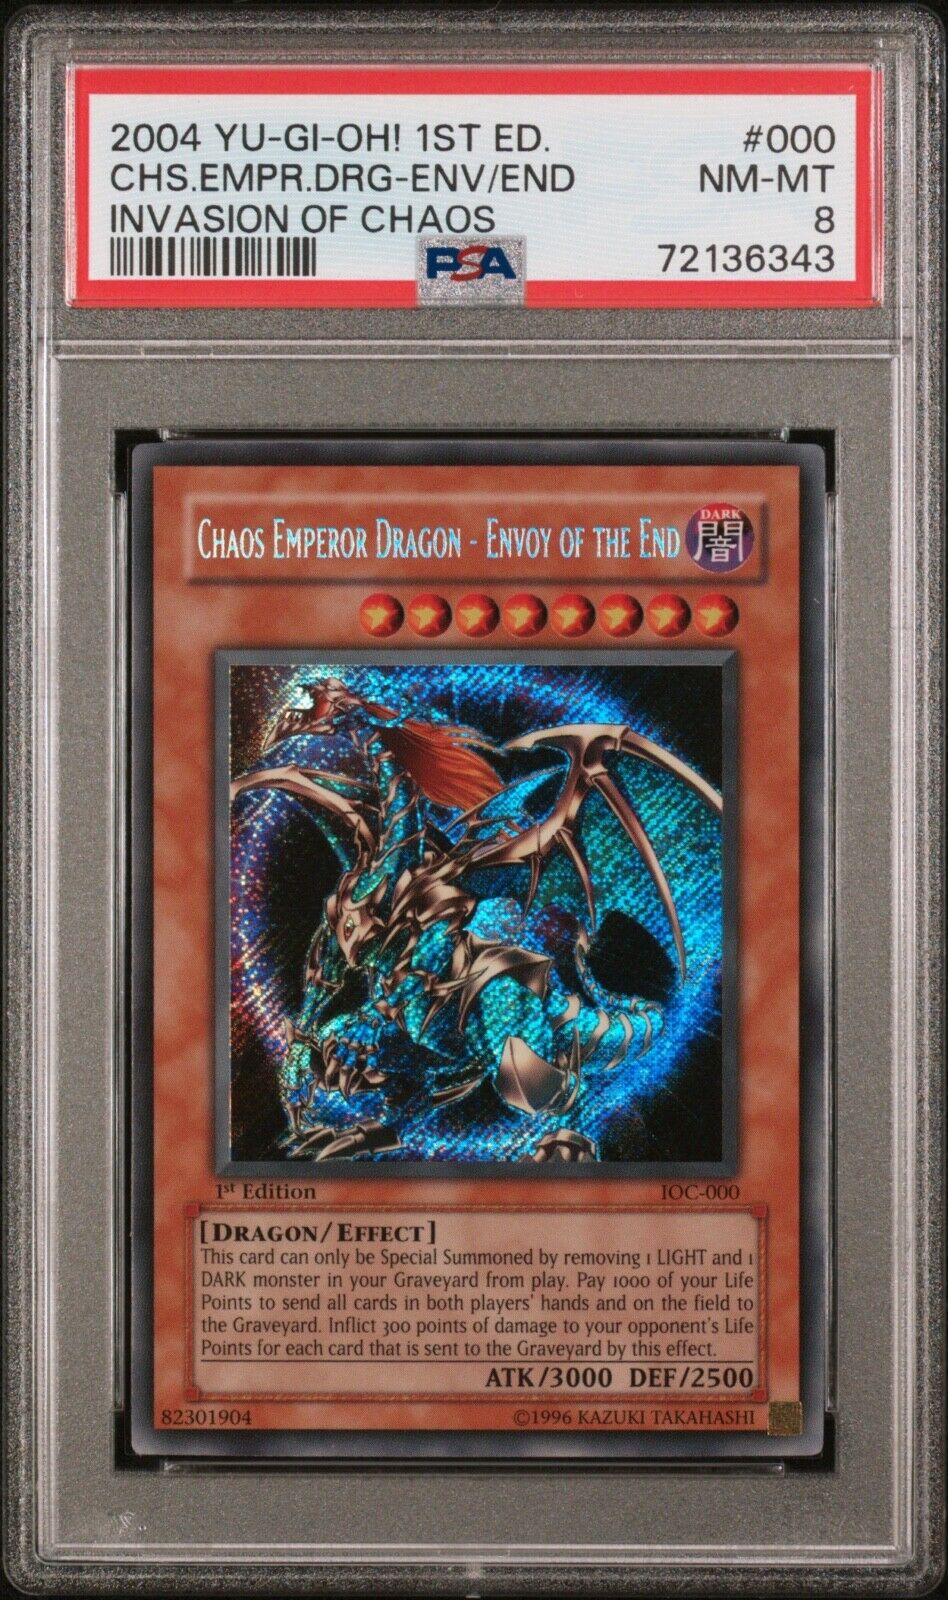 yu gi oh Chaos Emperor Dragon Envoy Of The End Ioc-000 Ced 1st Edition PSA 8 ENG